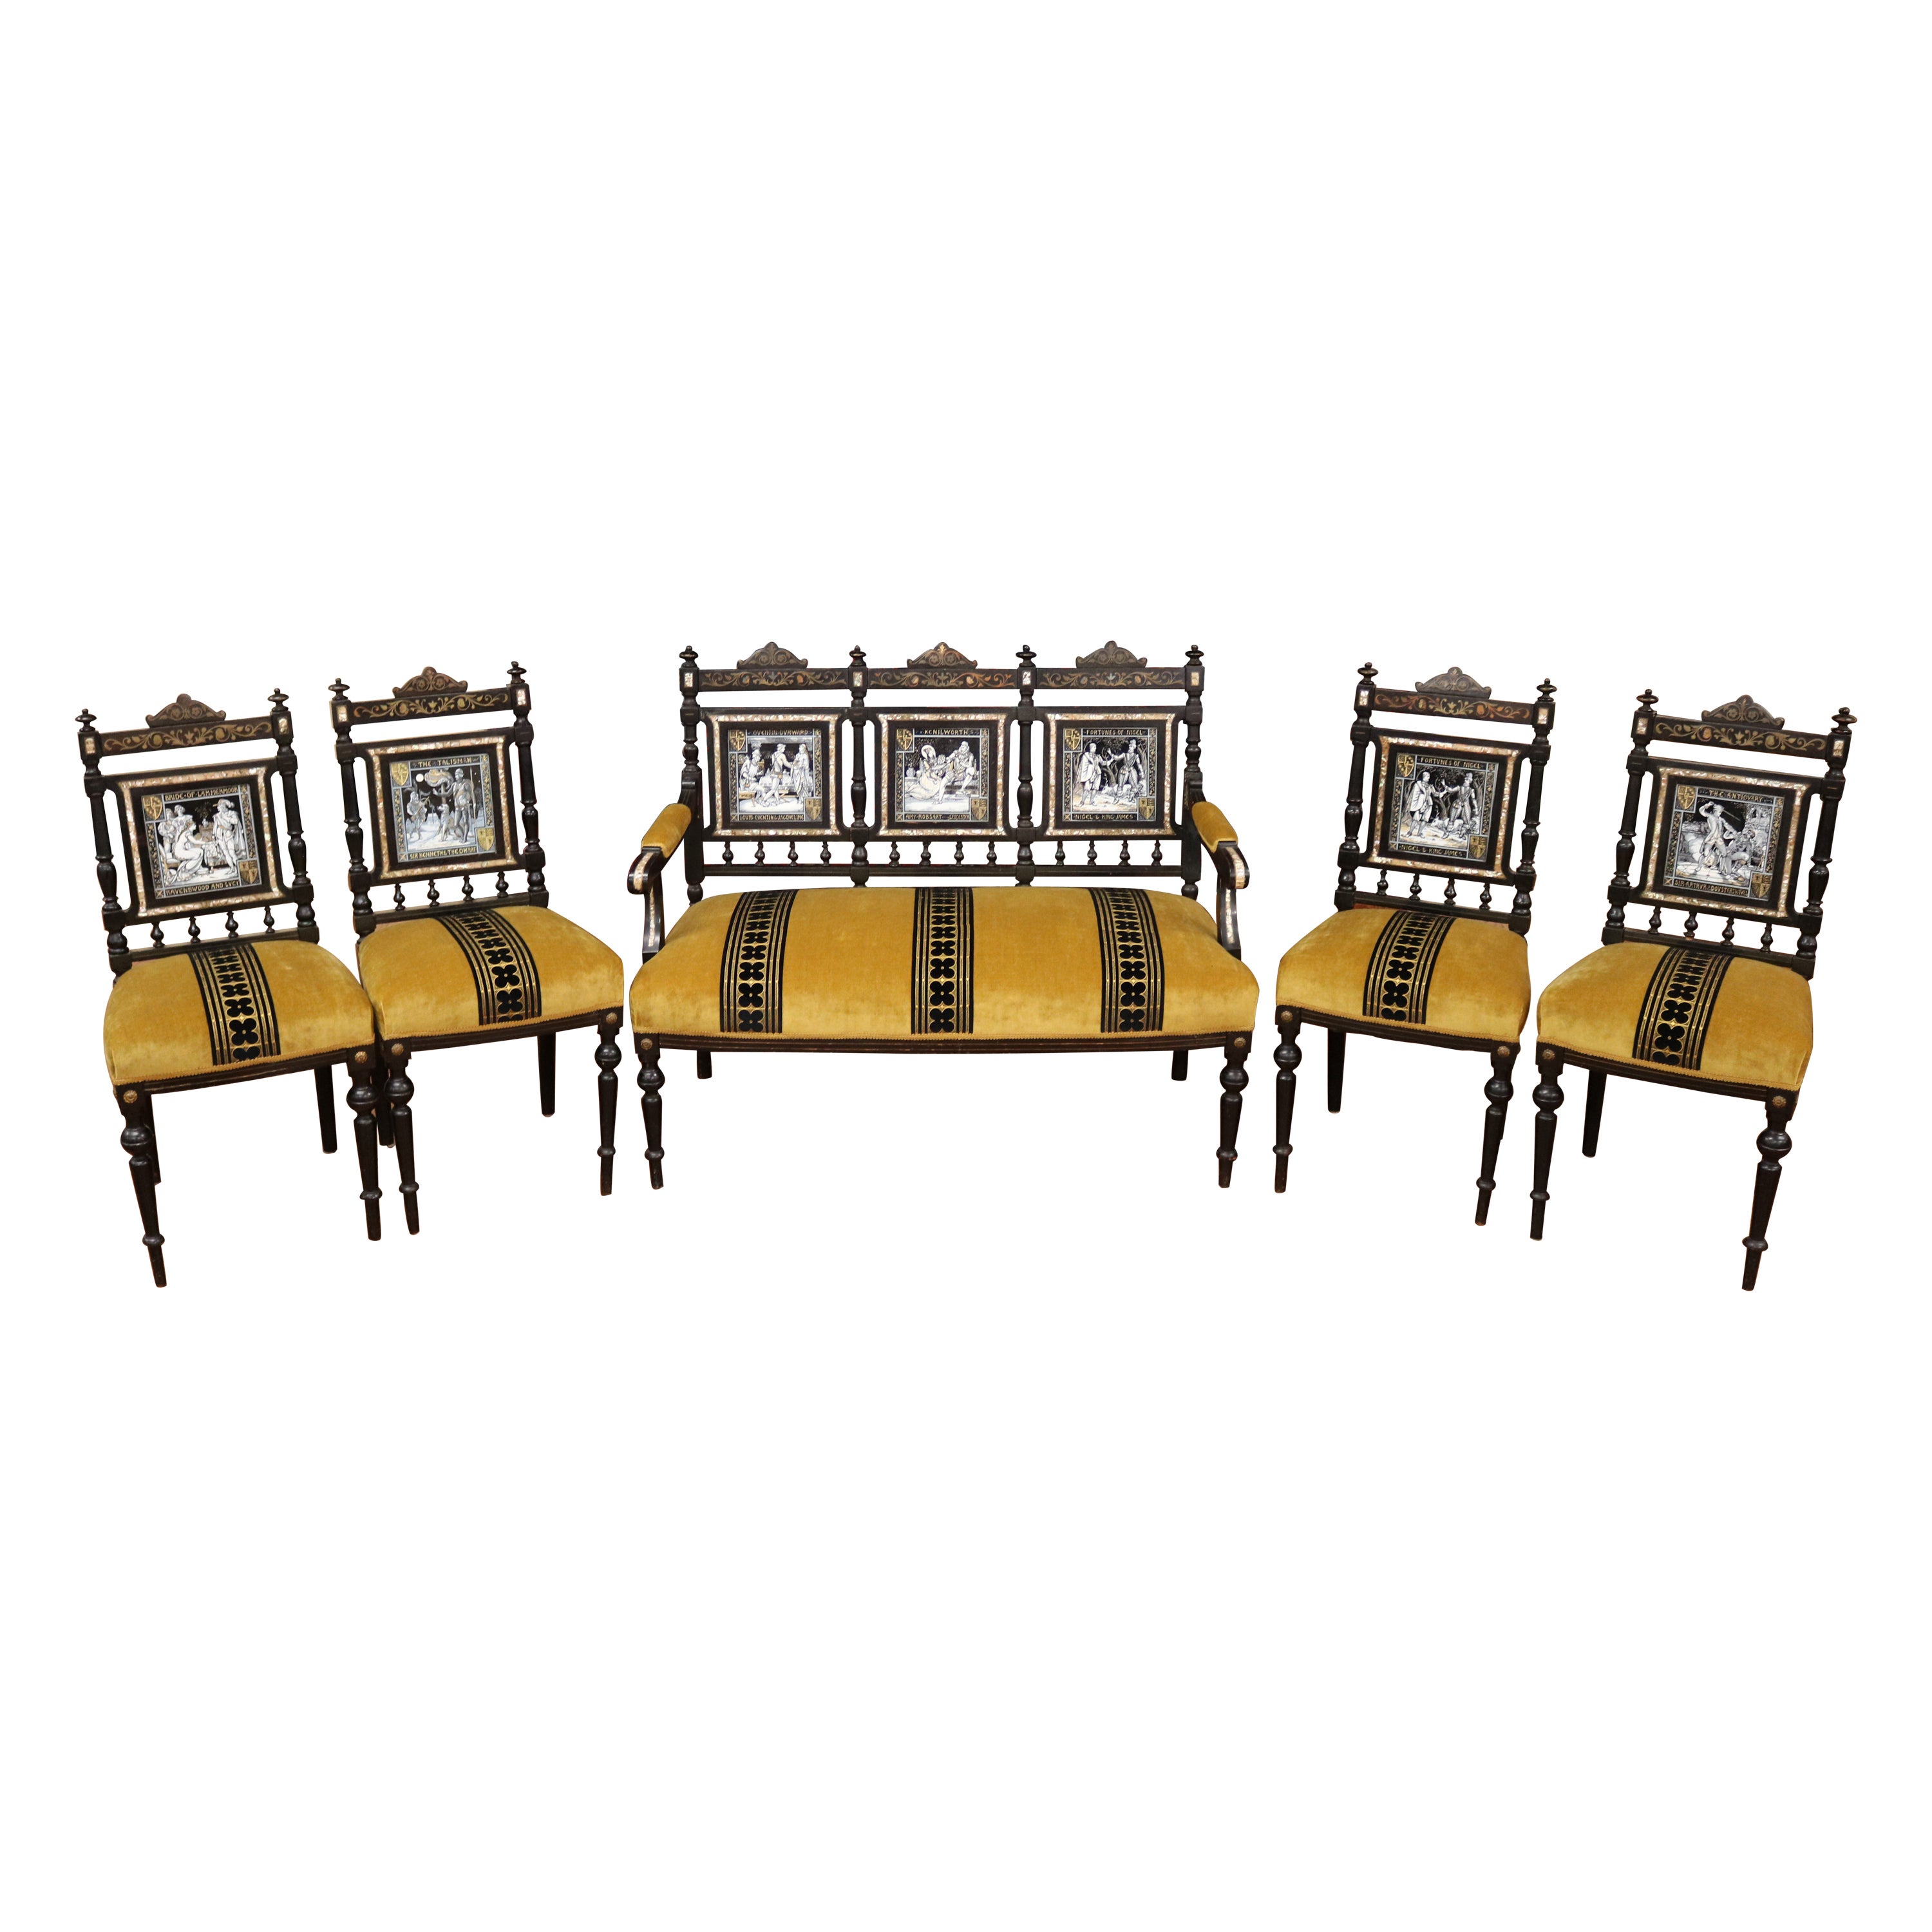 19th Century Aesthetic Victorian Parlor Set Settee & 4 Chairs By John Moyr Smith